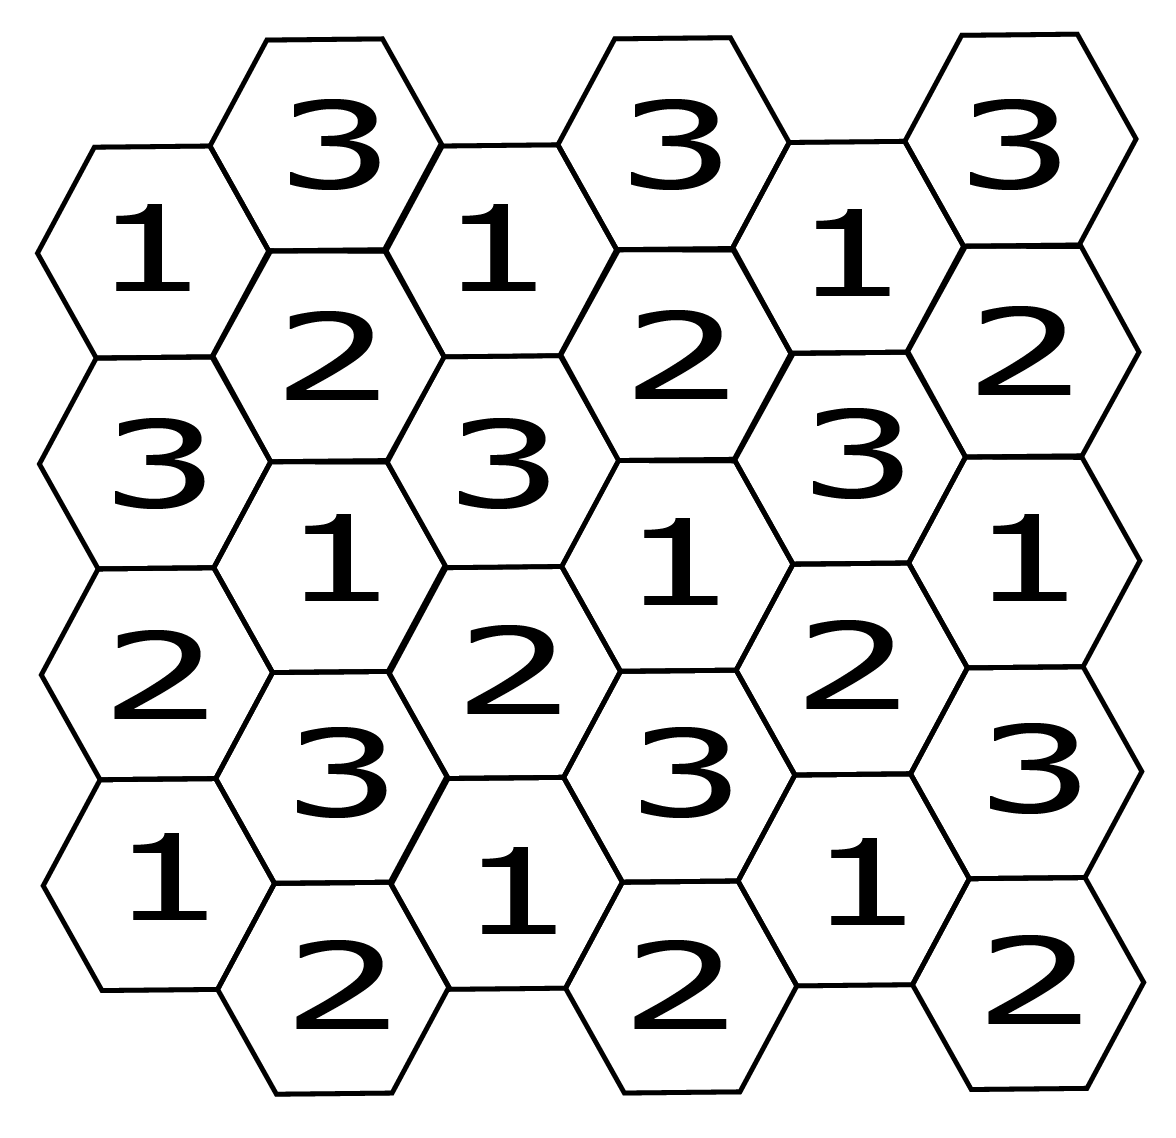 The hexagons in the first column of the tiling contain the numbers 1, 3, 2, 1 when read from top to bottom. The hexagons in the second column contain 3, 2, 1, 3, 2. The third and fifth columns match the first. The fourth and sixth columns match the second.